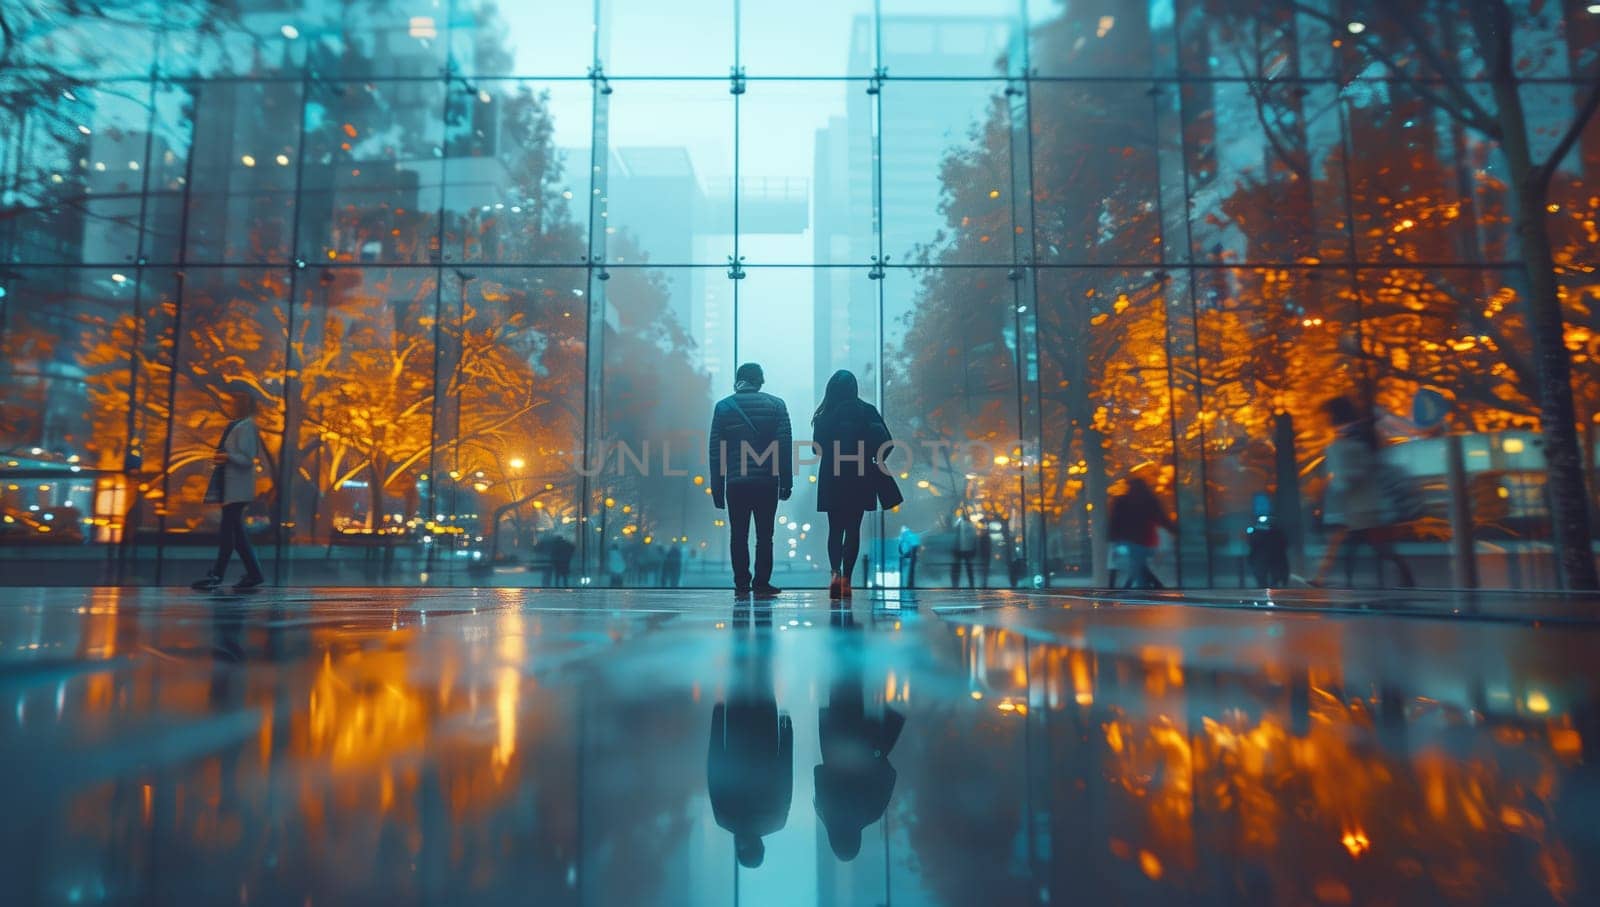 A man and woman stand by a large window, overlooking the electric blue cityscape by richwolf